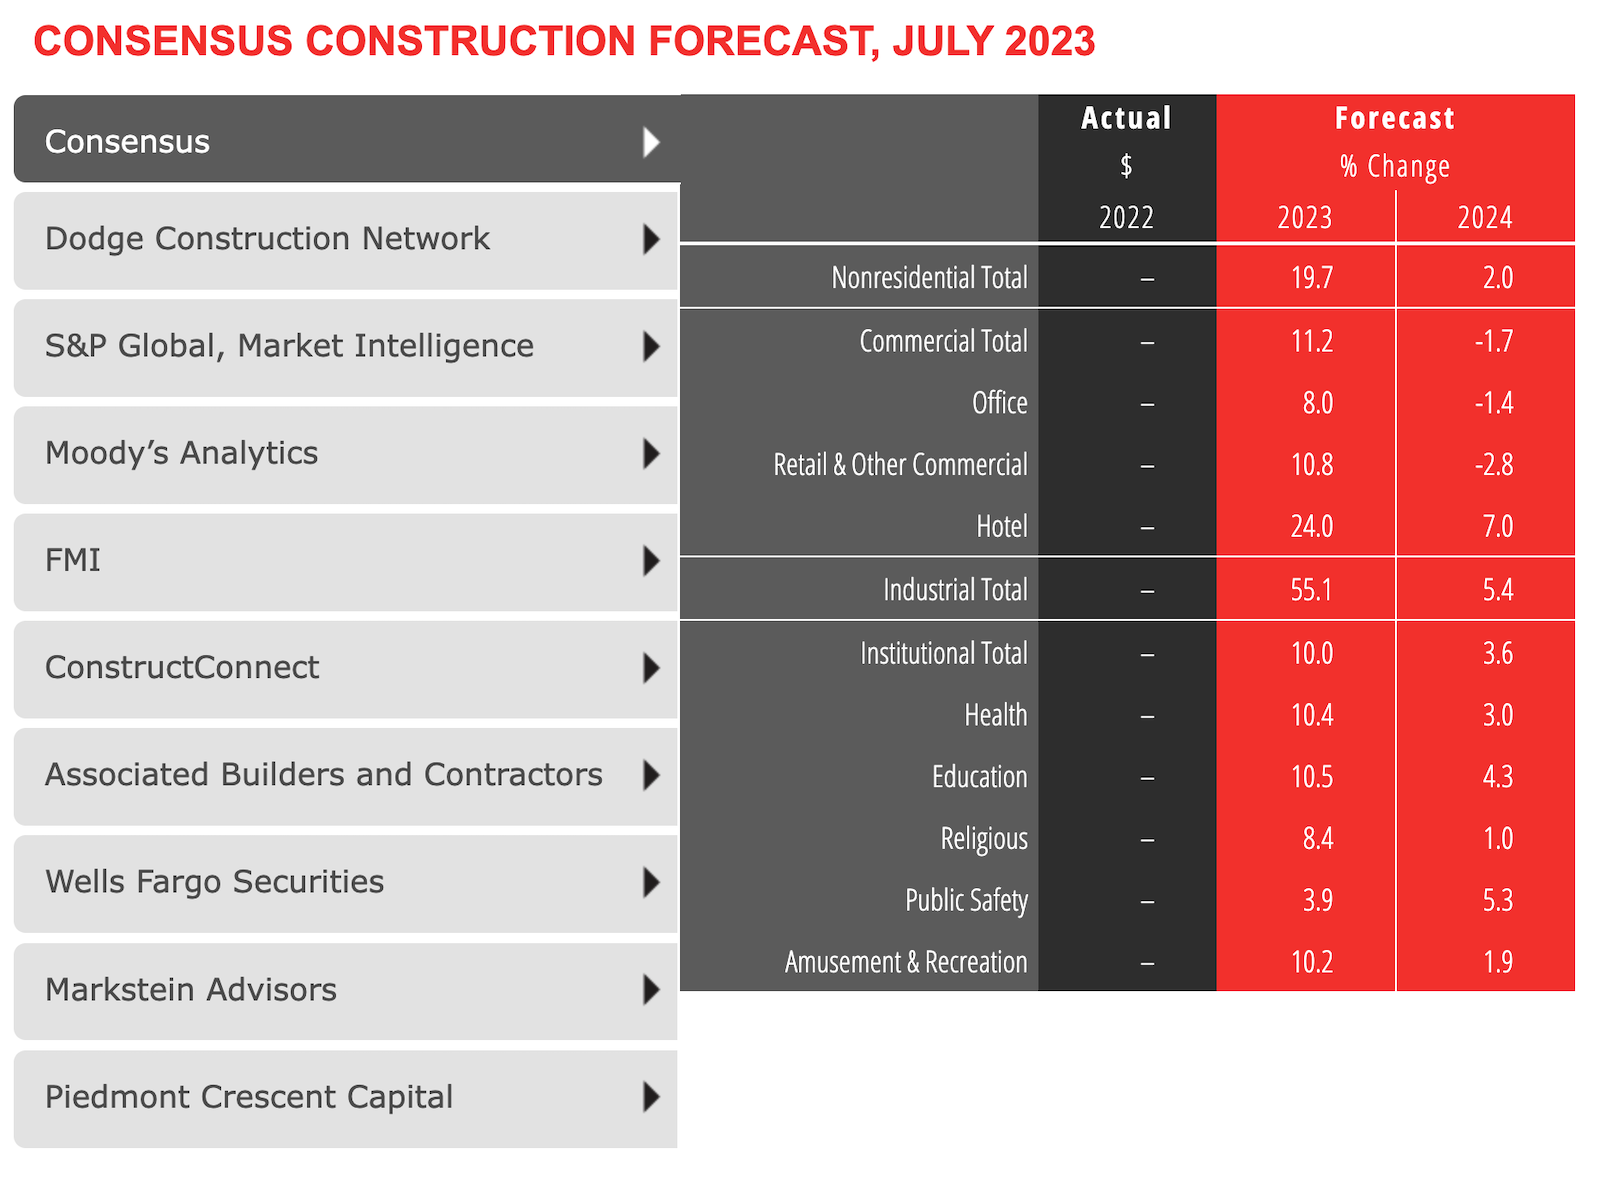 July 2023 AIA Consensus Construction Forecast Panel